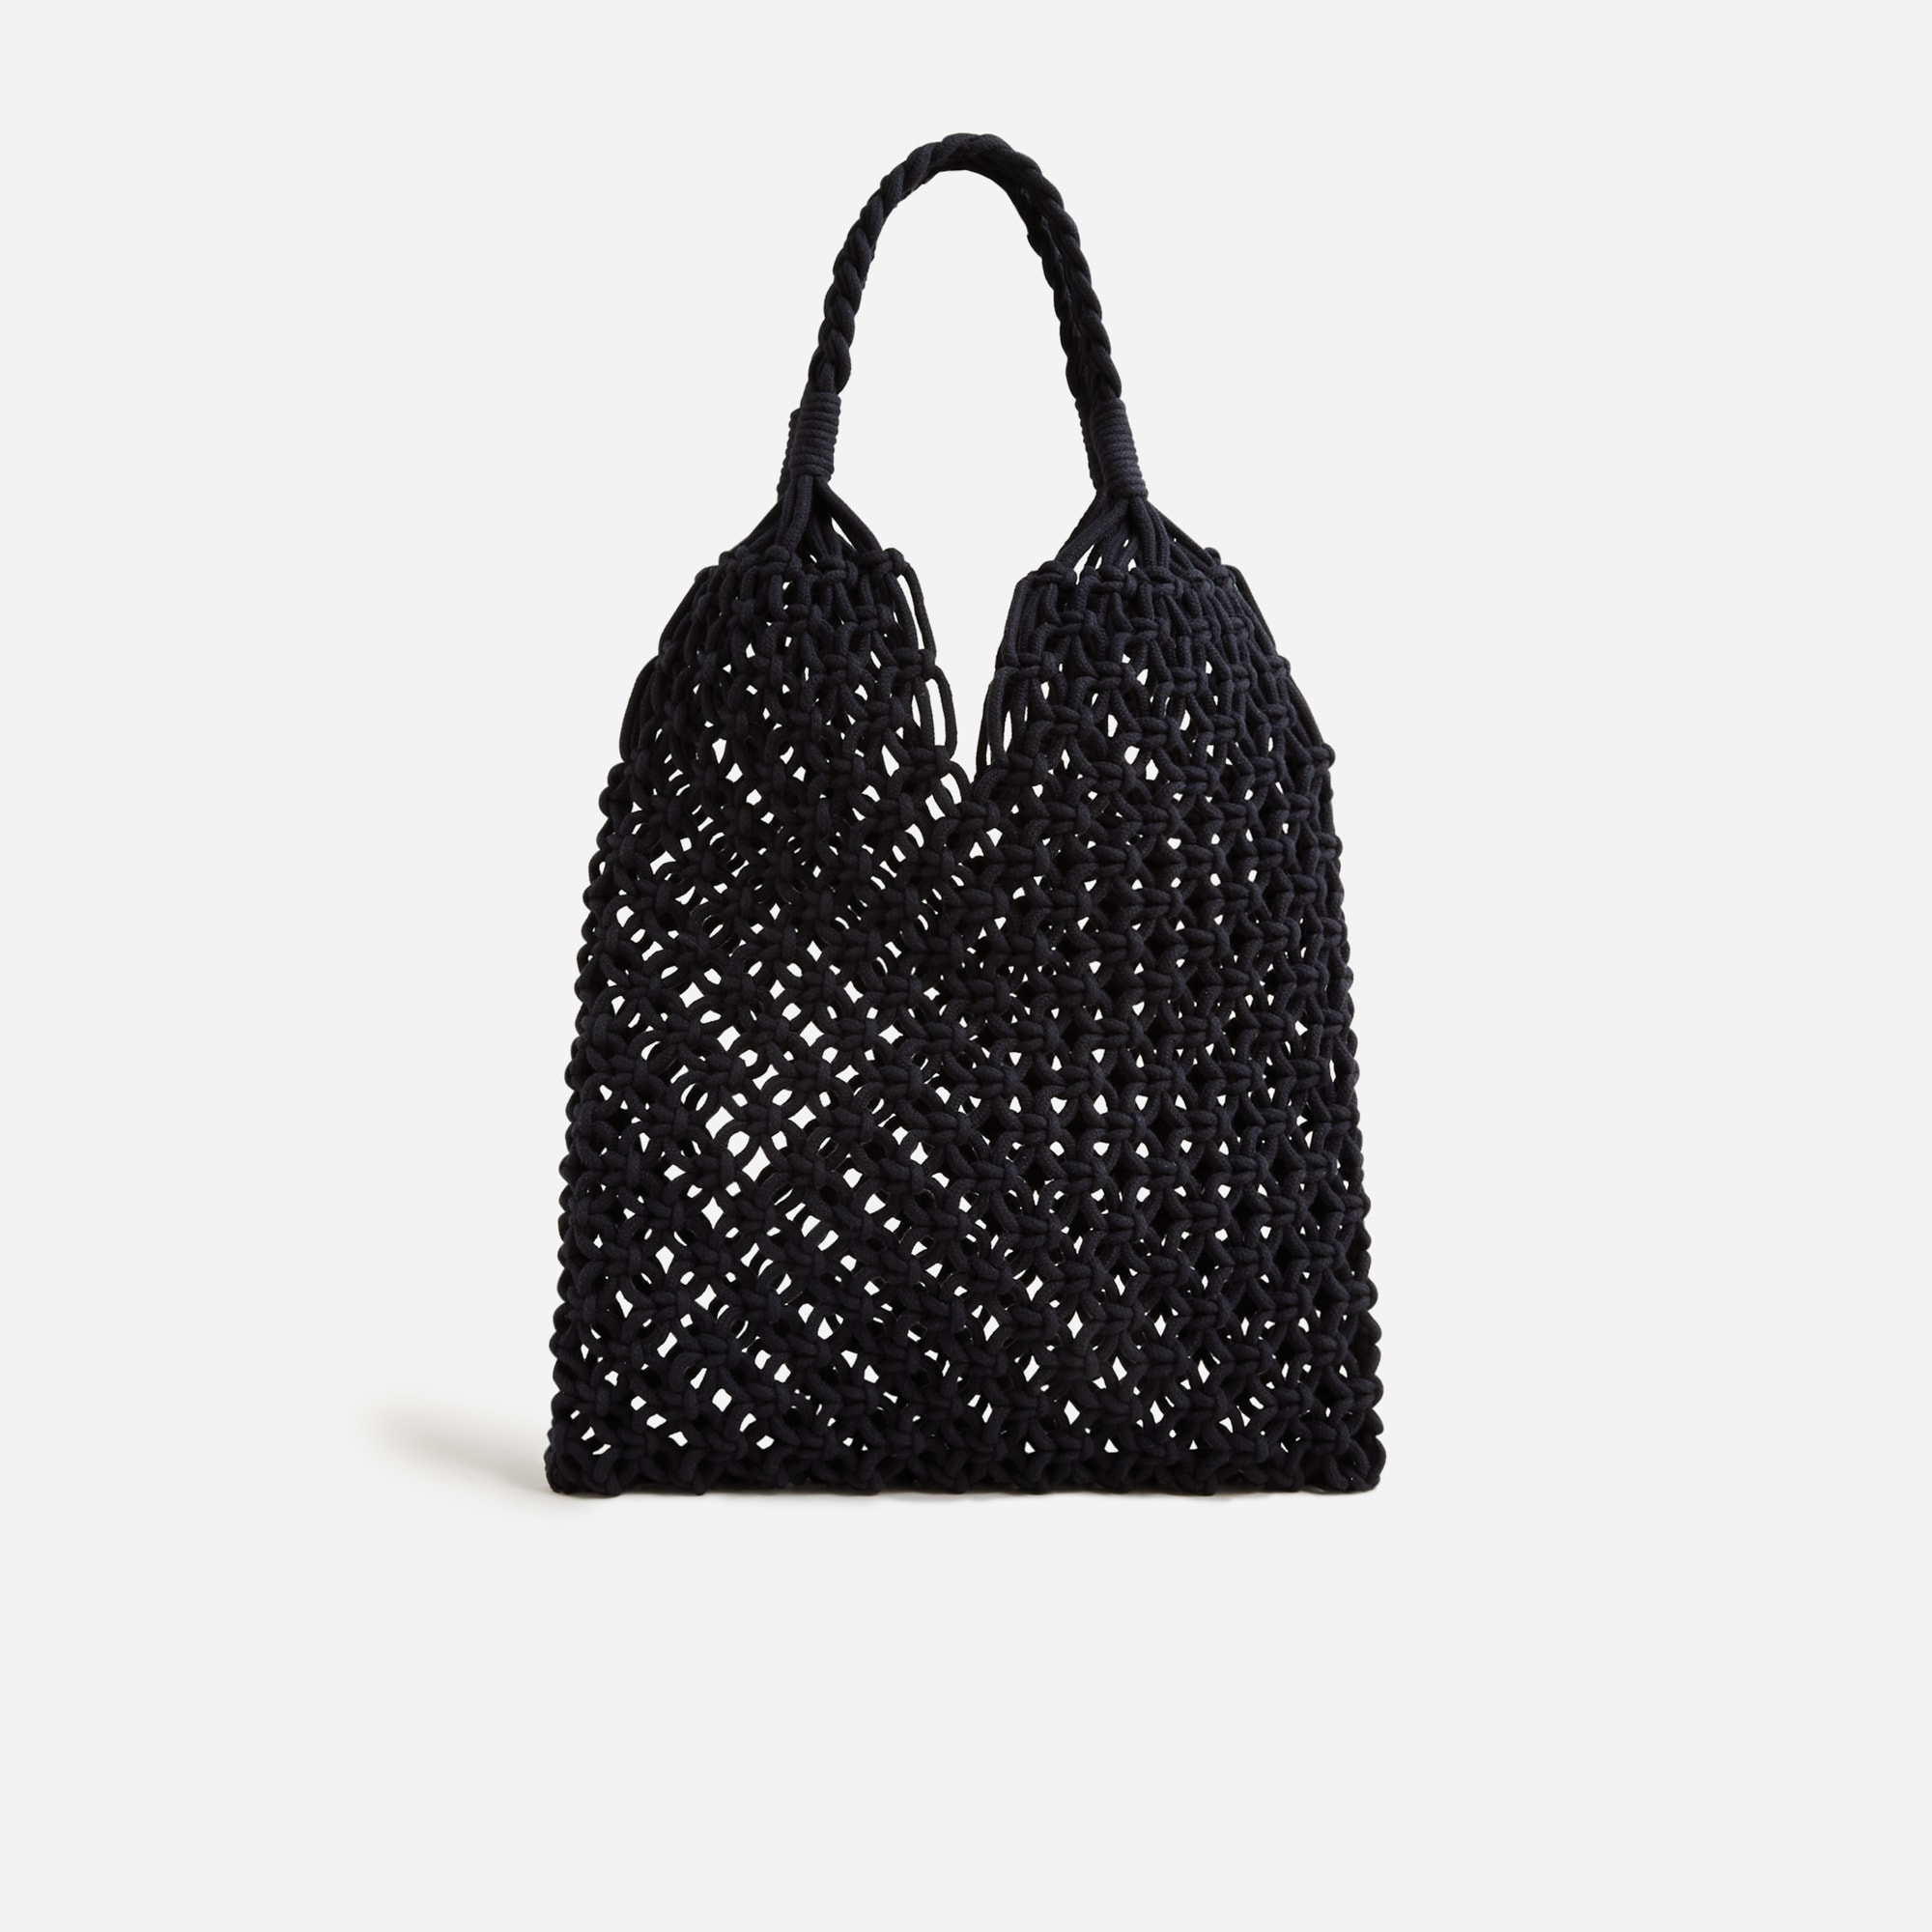 Cadiz hand-knotted rope tote